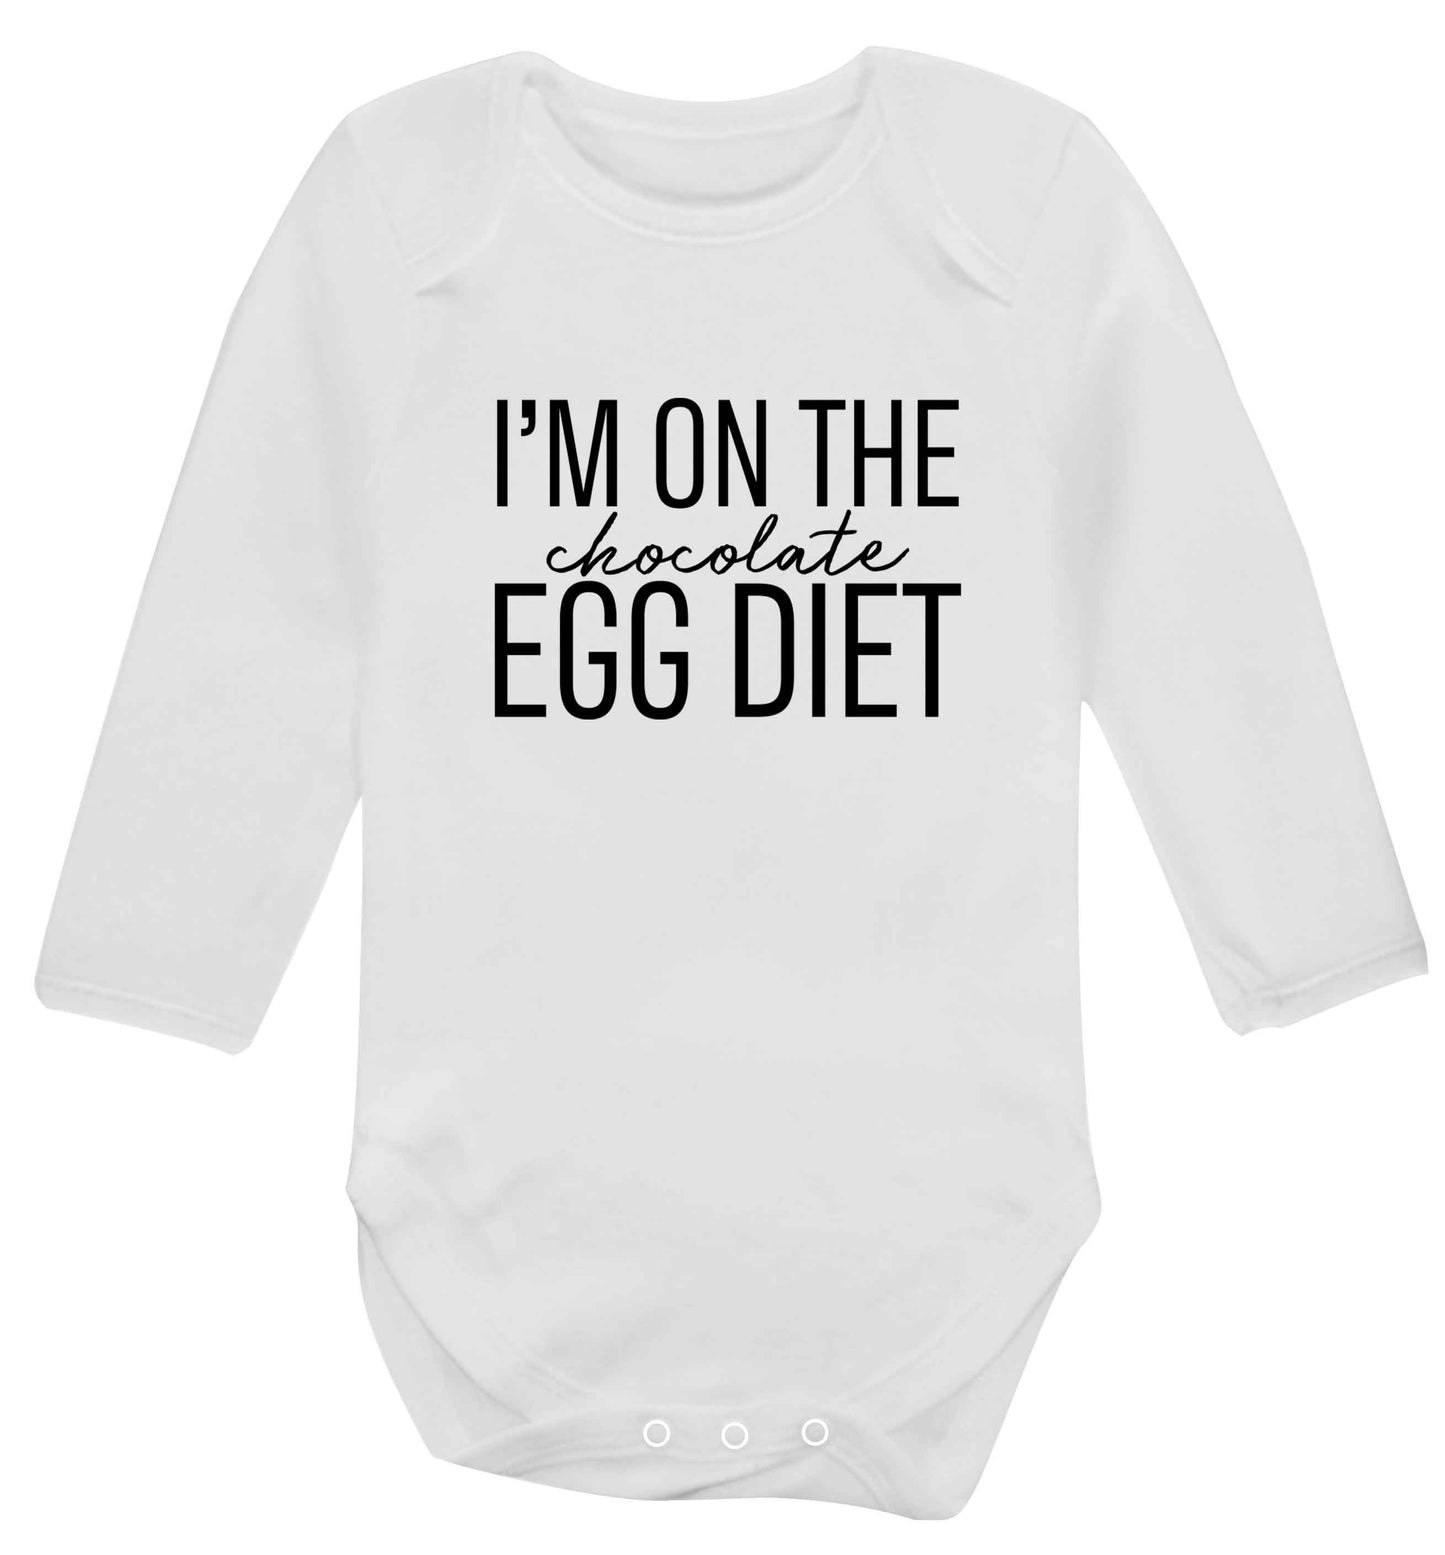 I'm on the chocolate egg diet baby vest long sleeved white 6-12 months